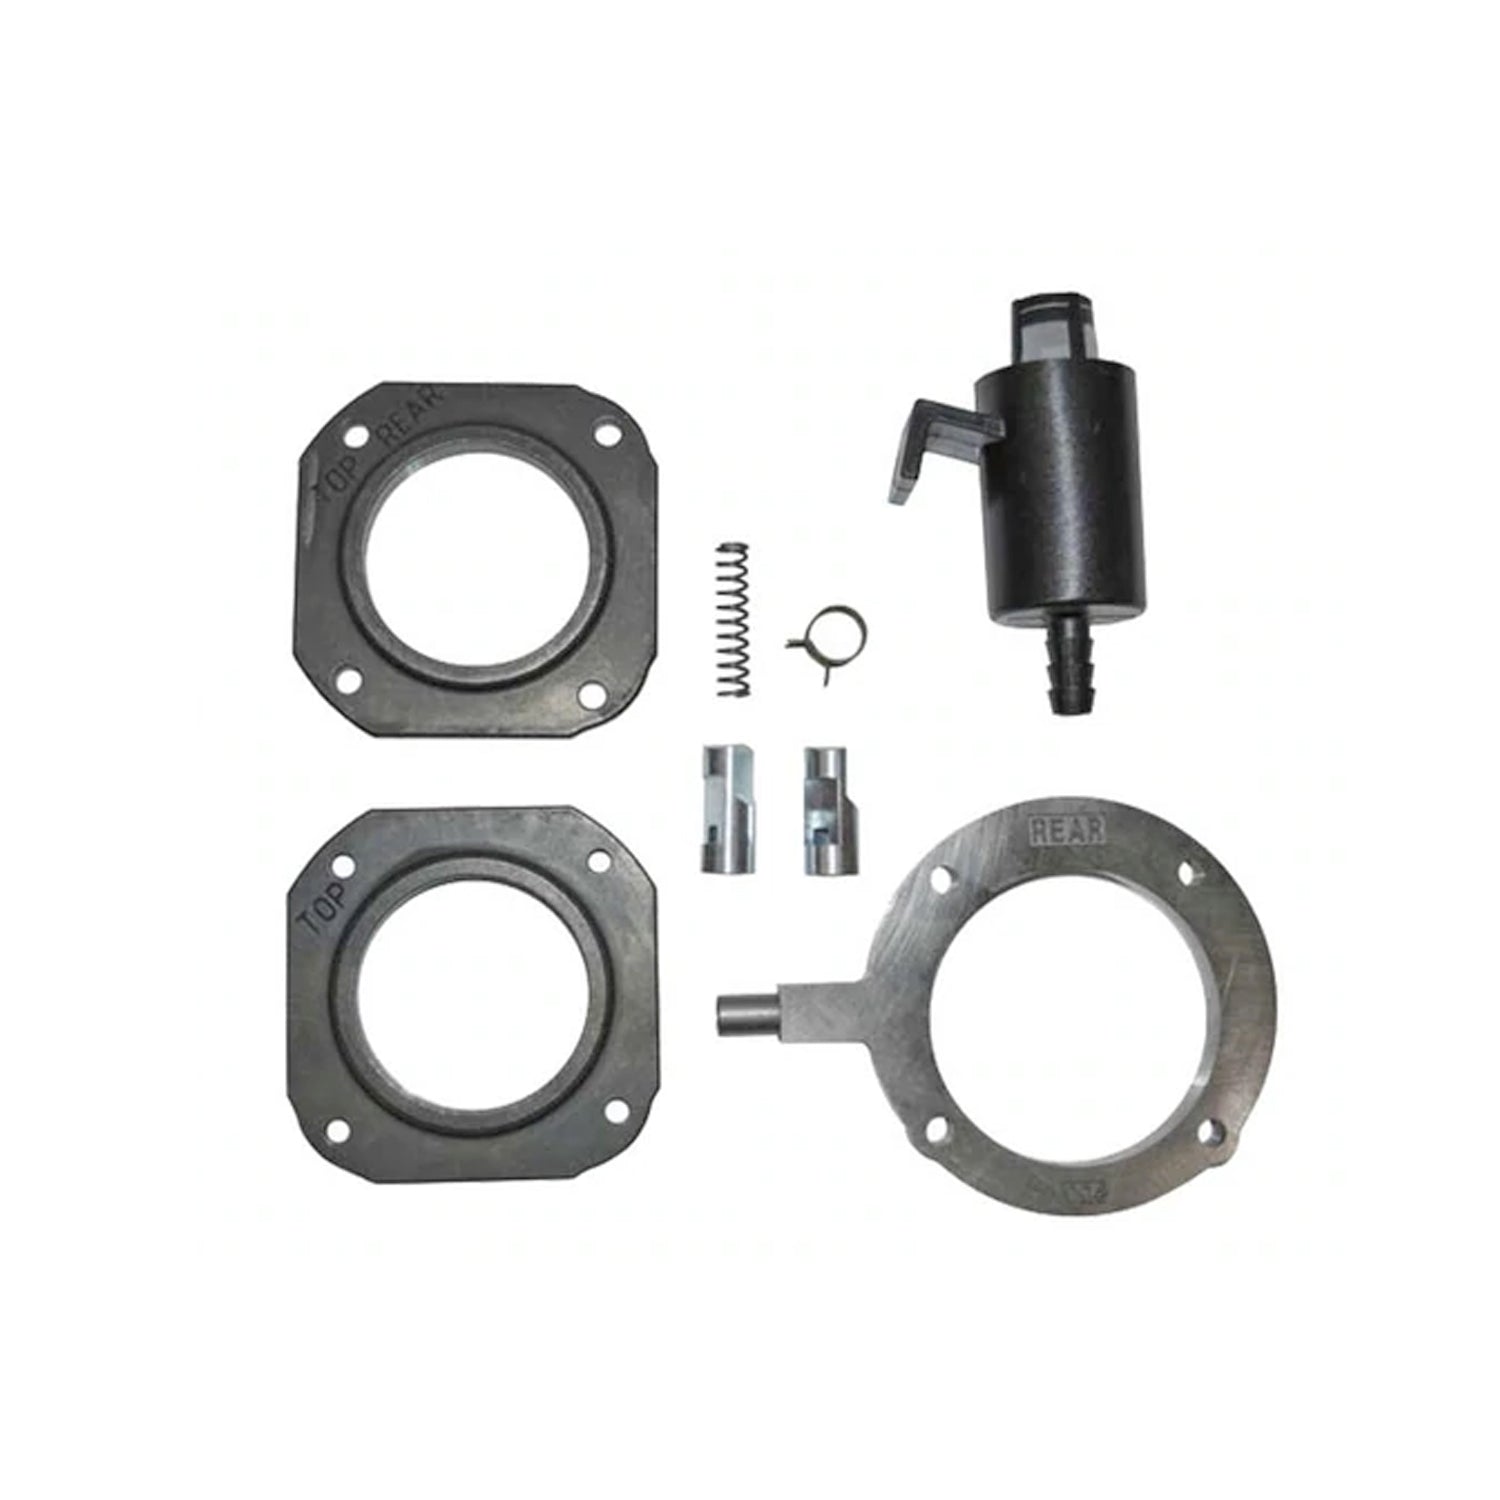 Replacement Pump Gear Case Kit For 6712 Series / Avalanche